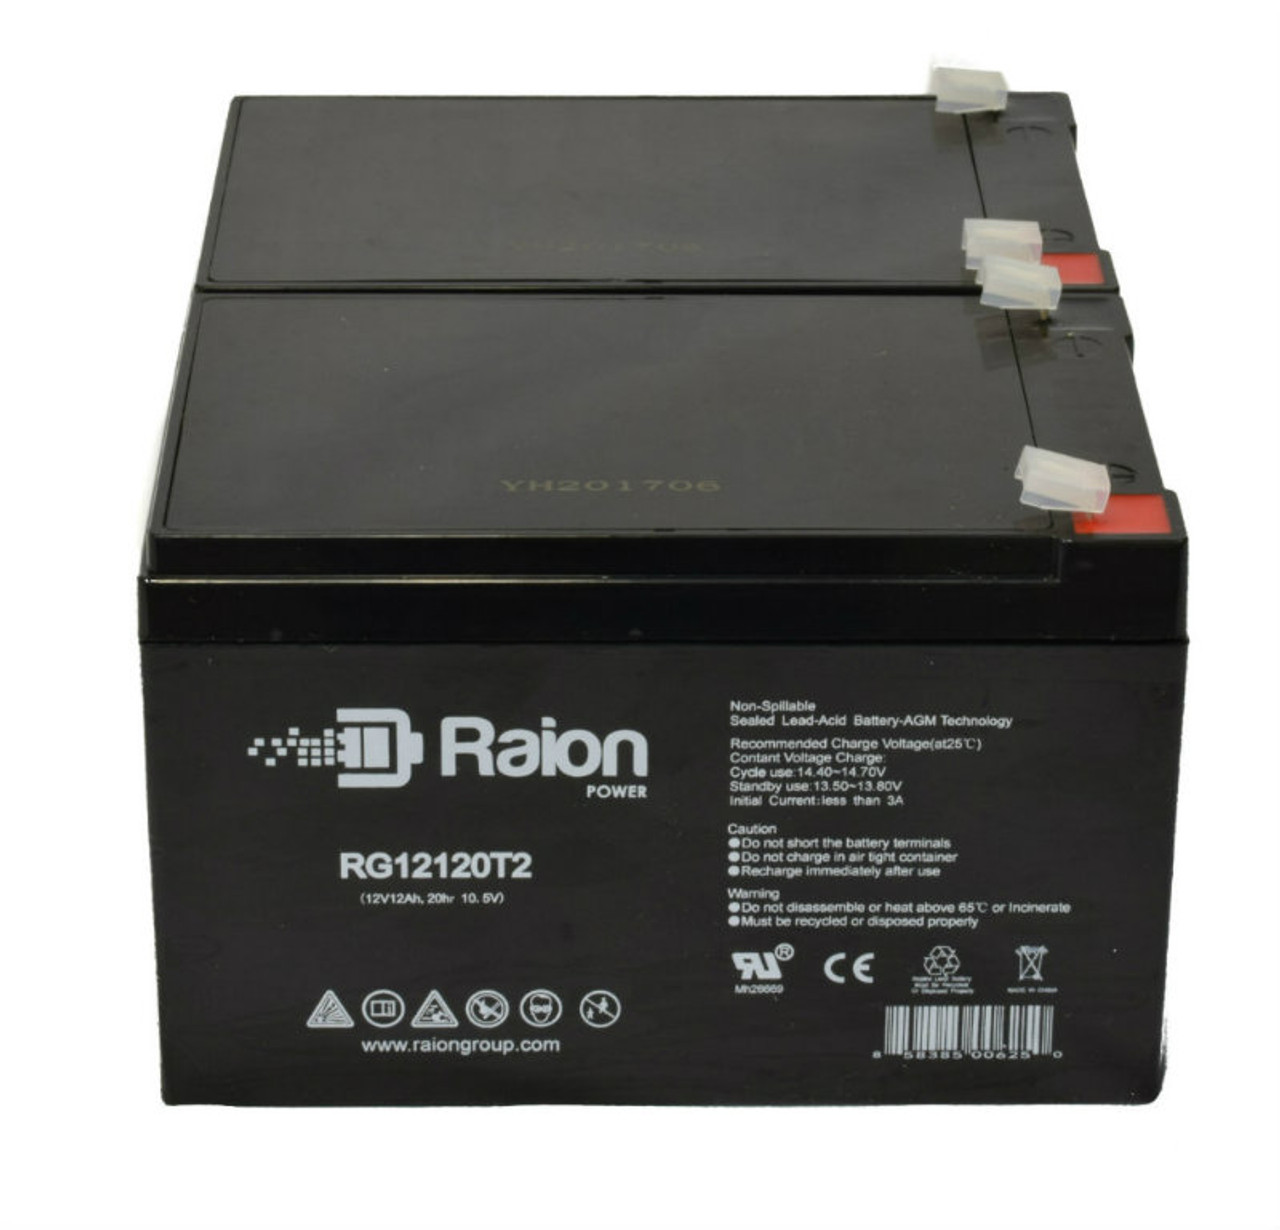 Raion Power 12V 12Ah Non-Spillable Compatible Replacement Battery for Leoch LP12-10 - (2 Pack)